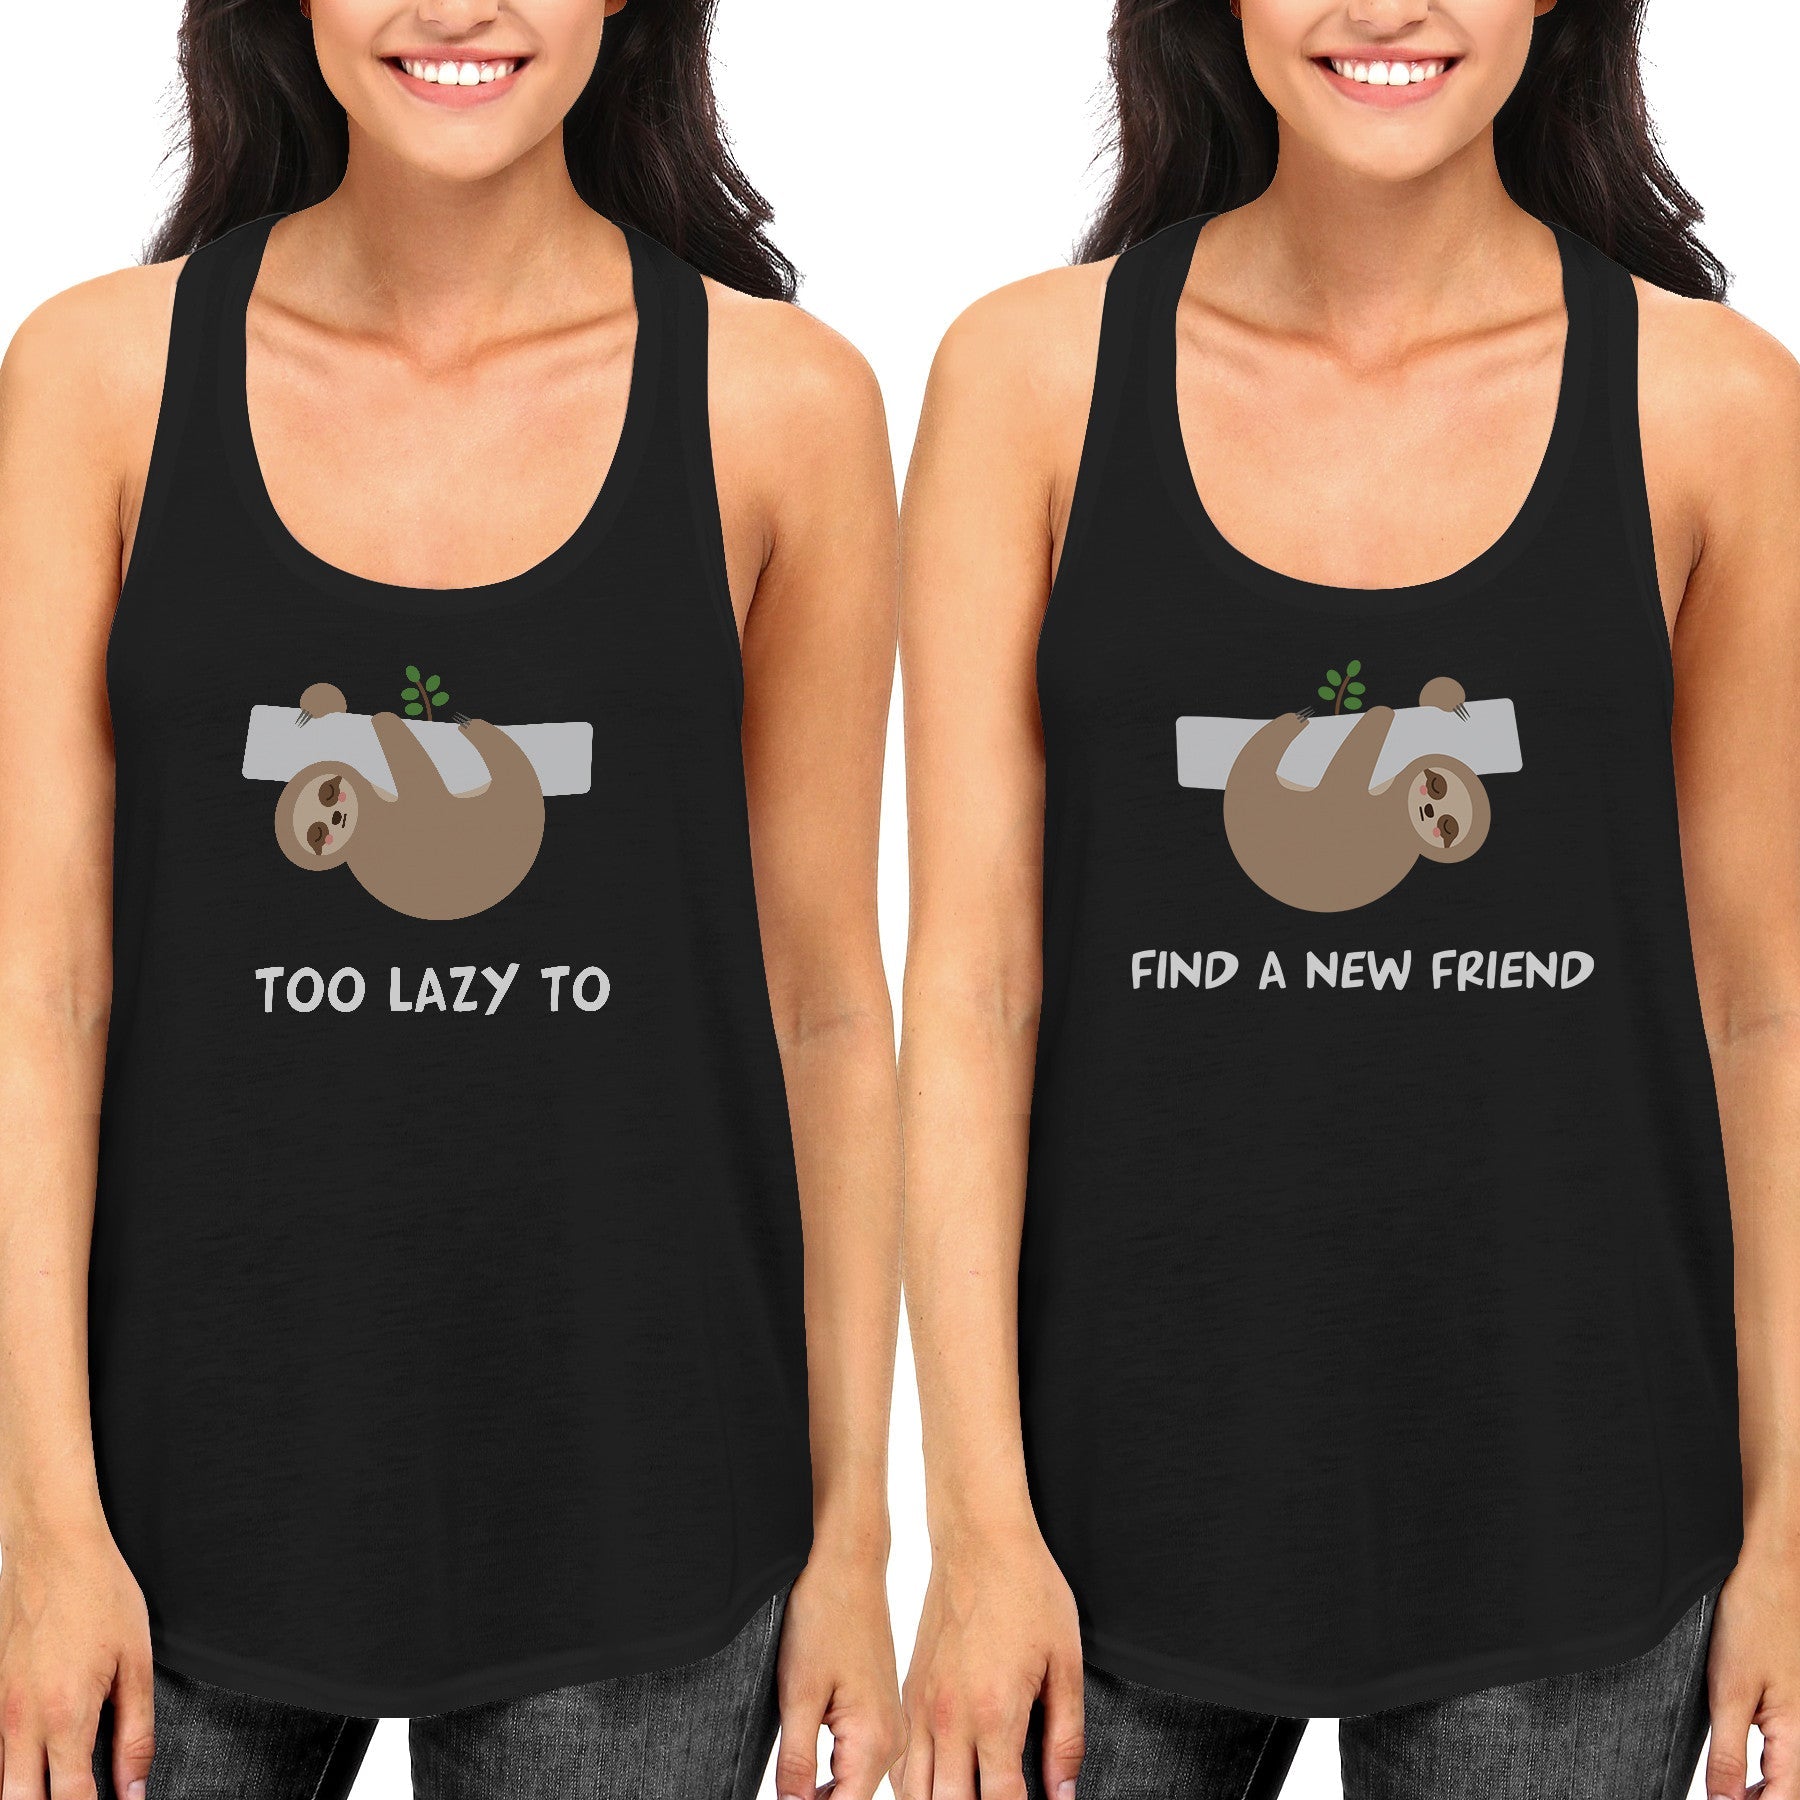 Cute Bff Matching Tanktop Too Lazy To Find A New Friend Best Friend'S Shirt - 365 In Love